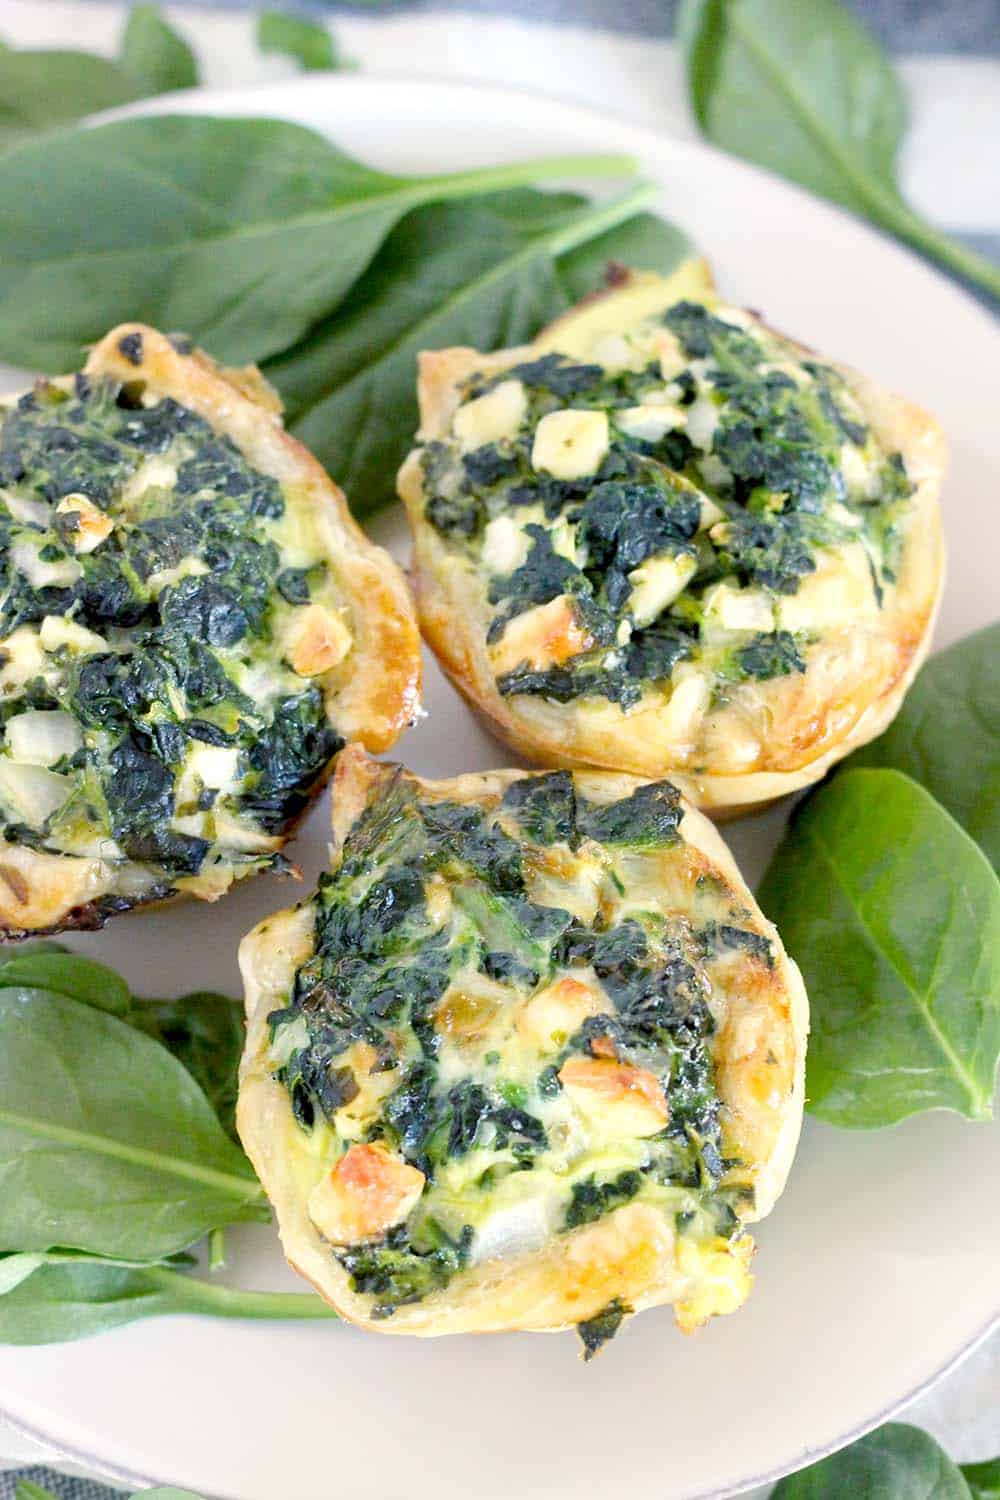 These Mini Spinach Feta pies are an easy alternative to traditional Greek Spanakopita, with only 5 ingredients and 10 minutes of hands on time! These are packed FULL of healthy spinach, and a perfect vegetarian entree or appetizer.